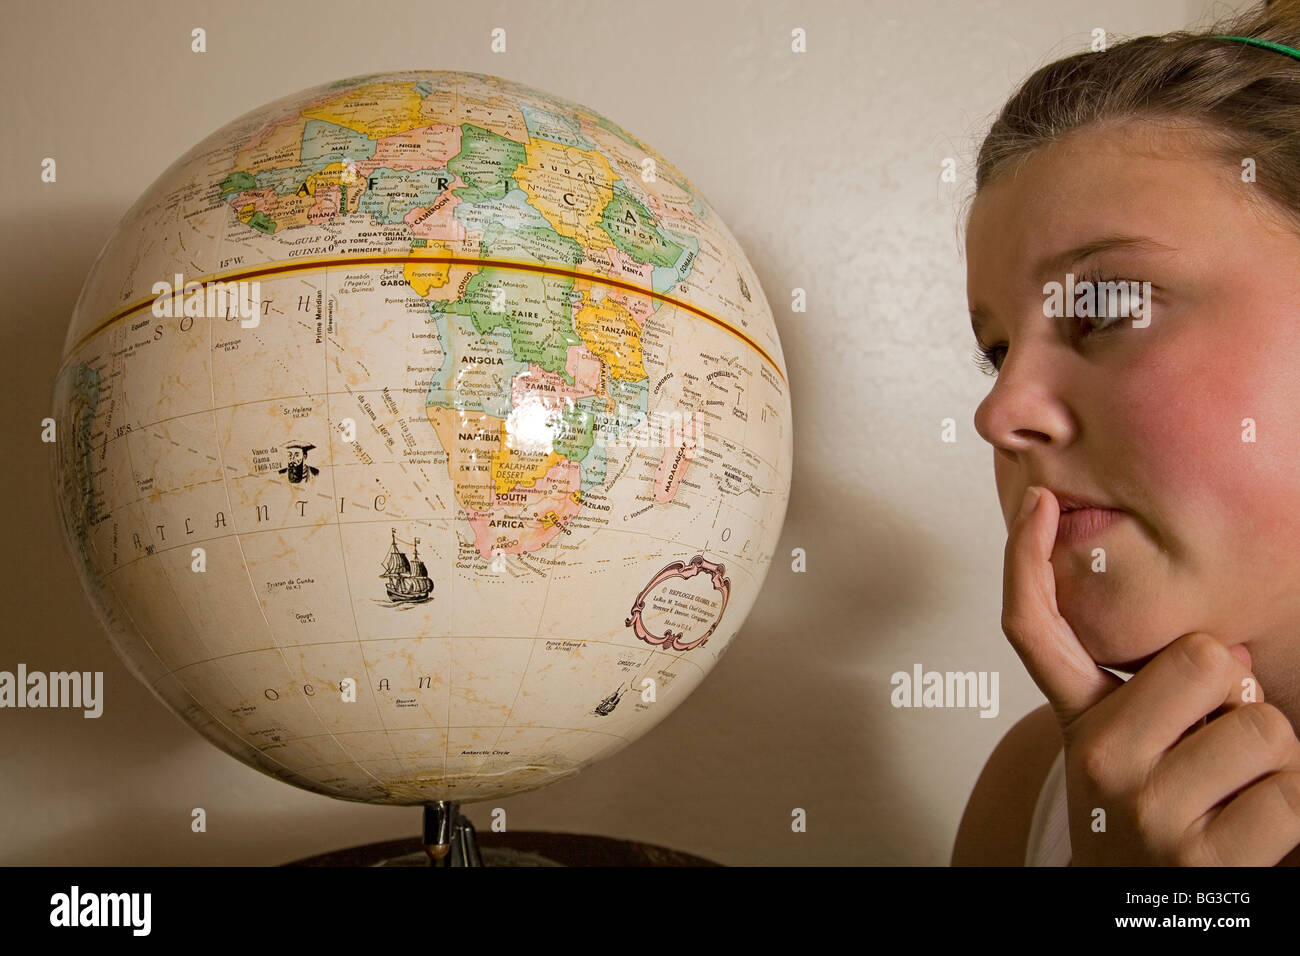 A teenager student looking at a world globe earth map of the world Stock Photo